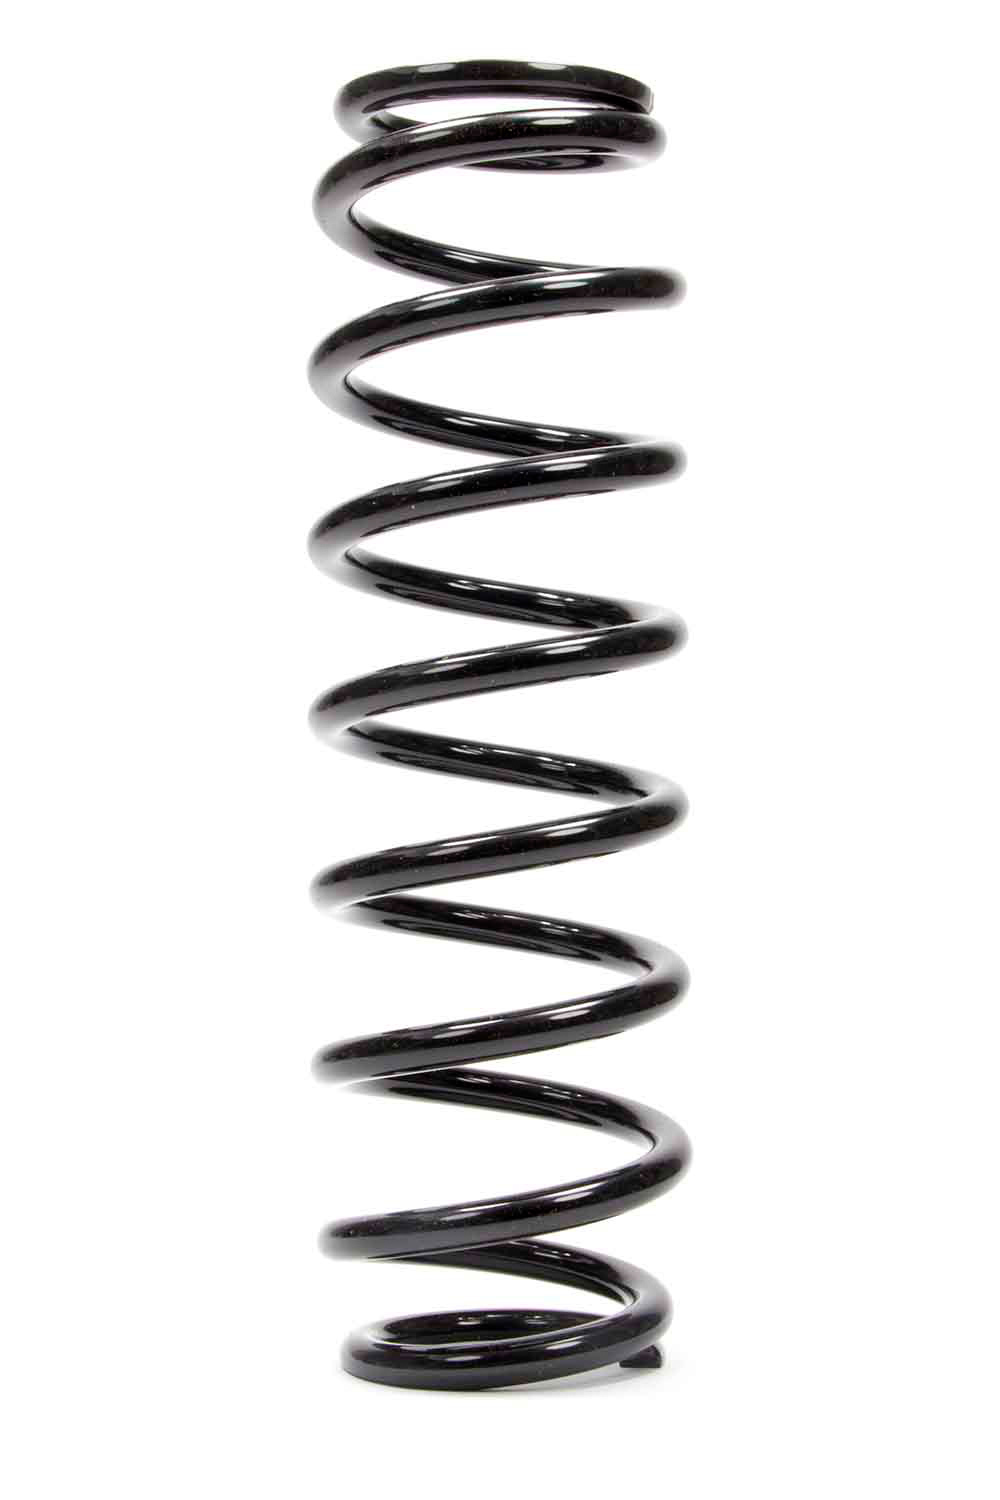 Integra Shocks 310-2514-200DLC Coil Spring, DLC Series, Coil-Over, 2.625 in ID, 14.000 in Length, 200 lb/in Spring Rate, Steel, Black Powder Coat, Each